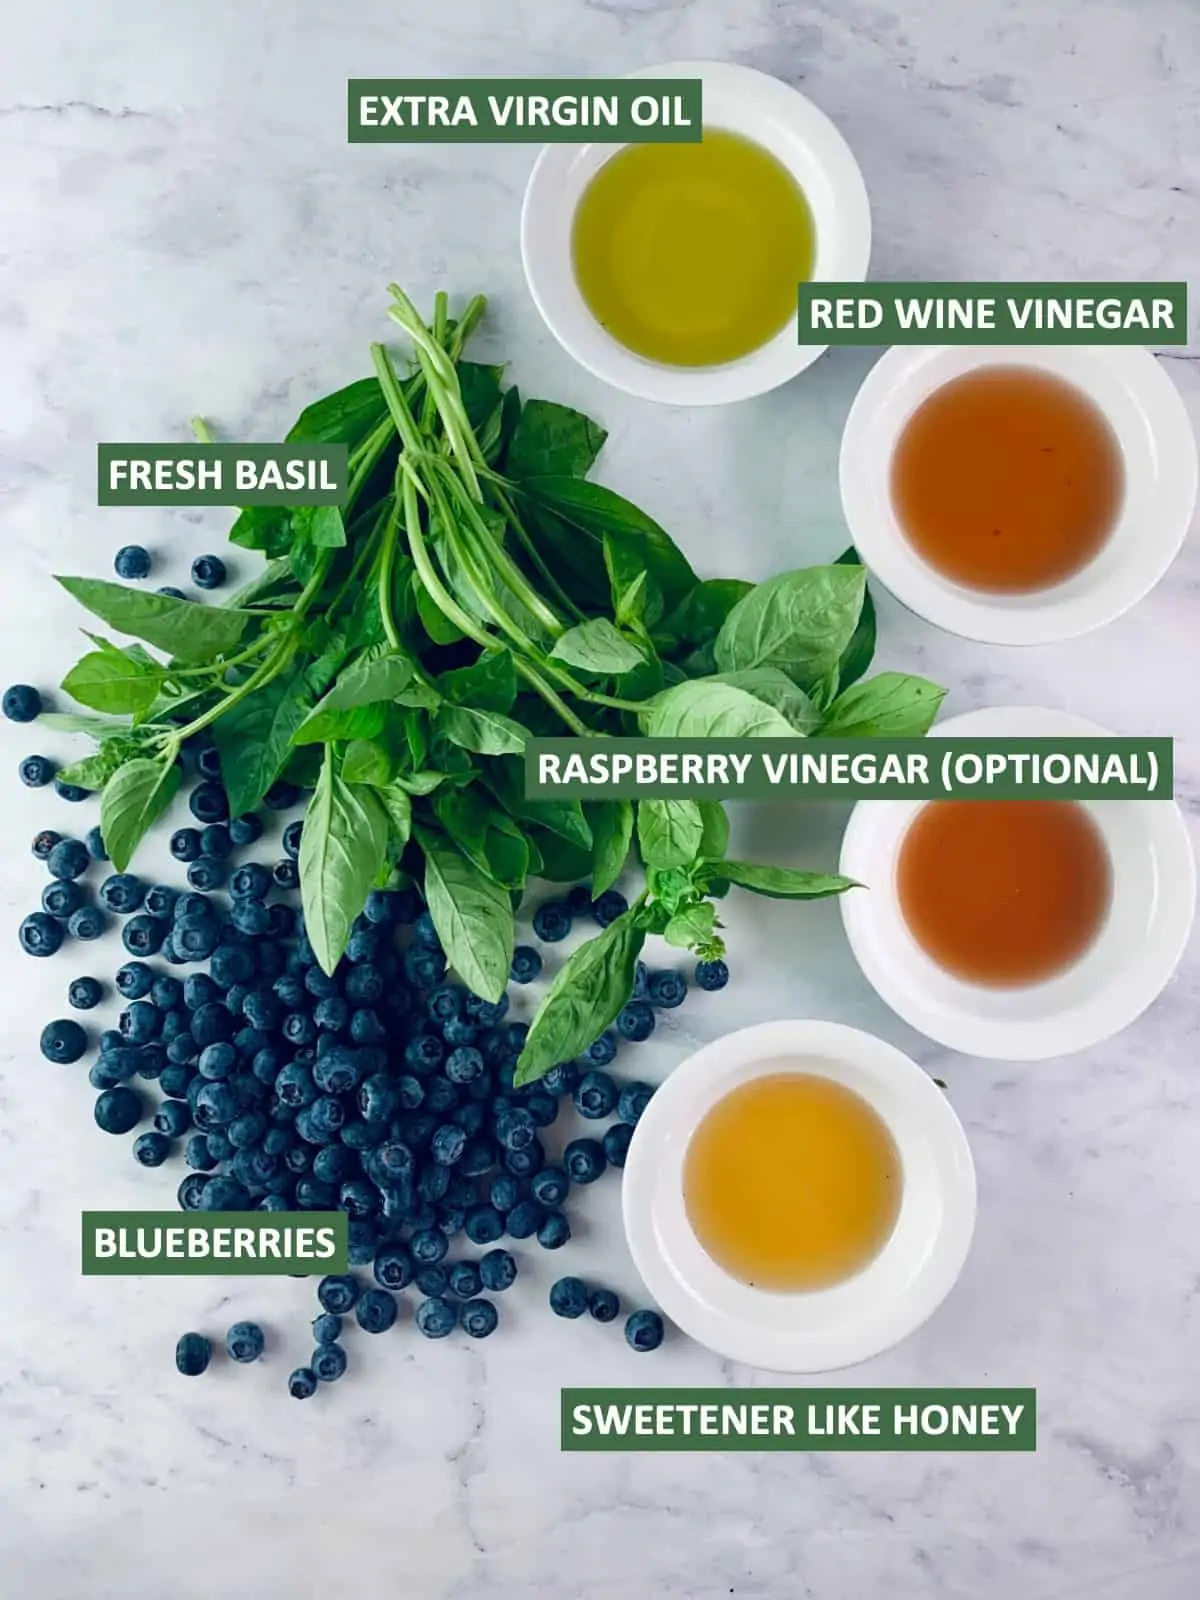 Labelled ingredients needed to make blueberry salad dressing.